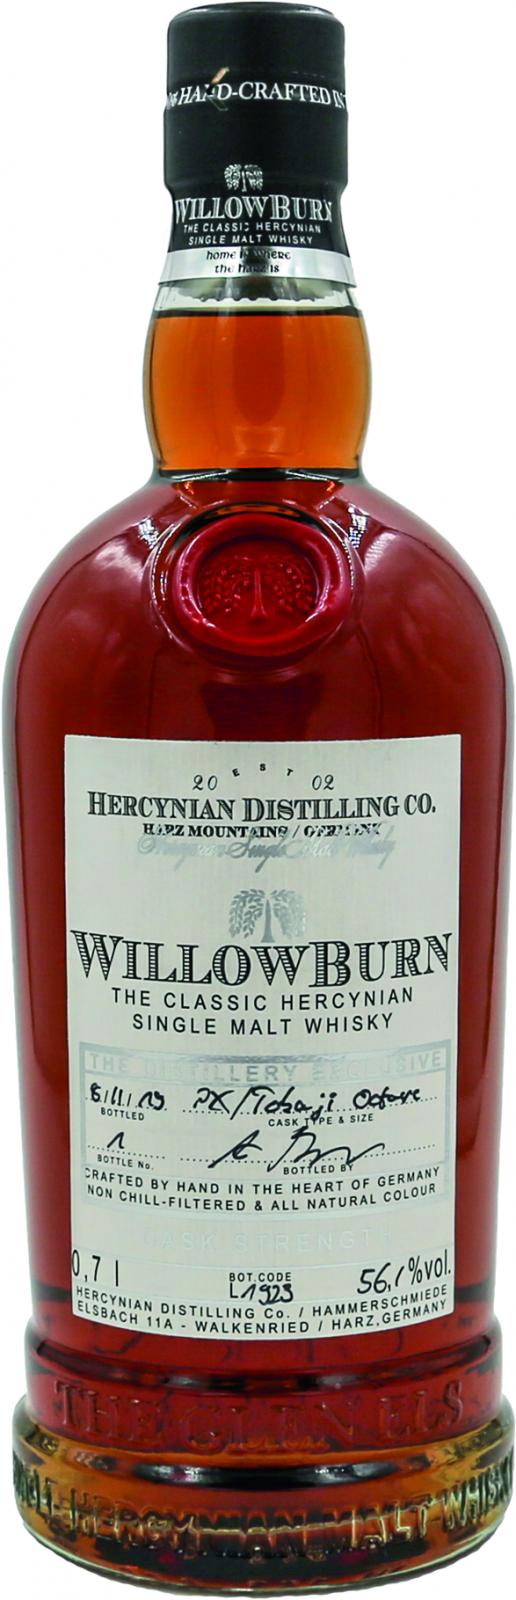 WillowBurn 2012 The Distillery Exclusive 56.1% 700ml